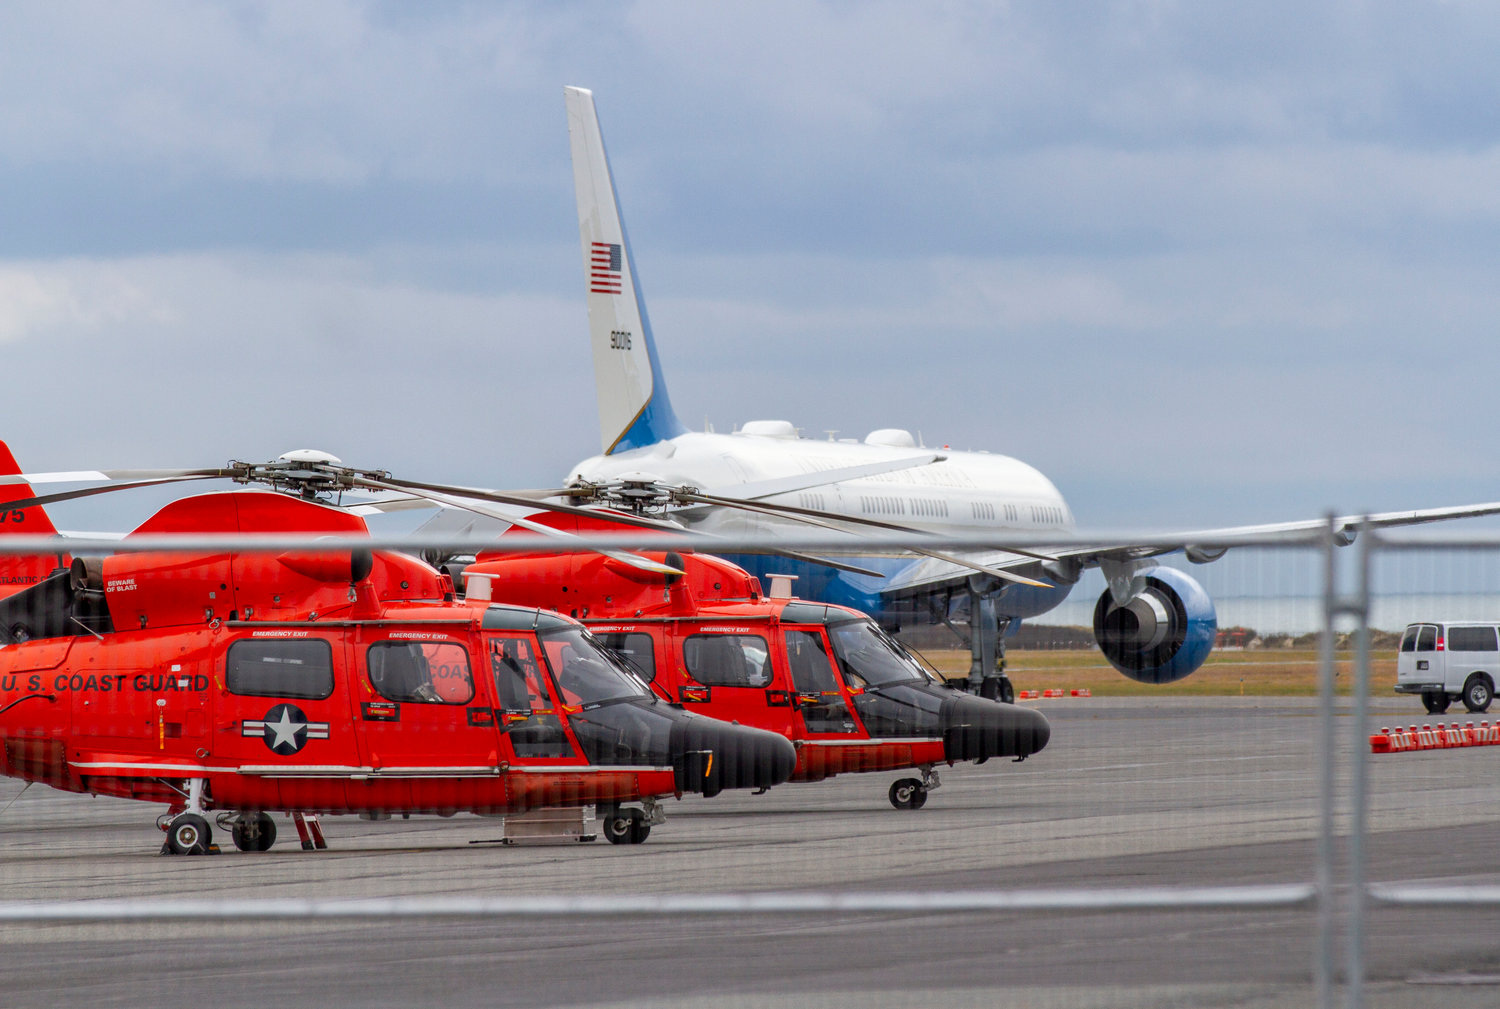 Air Force One on the tarmac of Nantucket Memorial Airport with a pair of U.S. Coast Guard helicopters in the foreground.